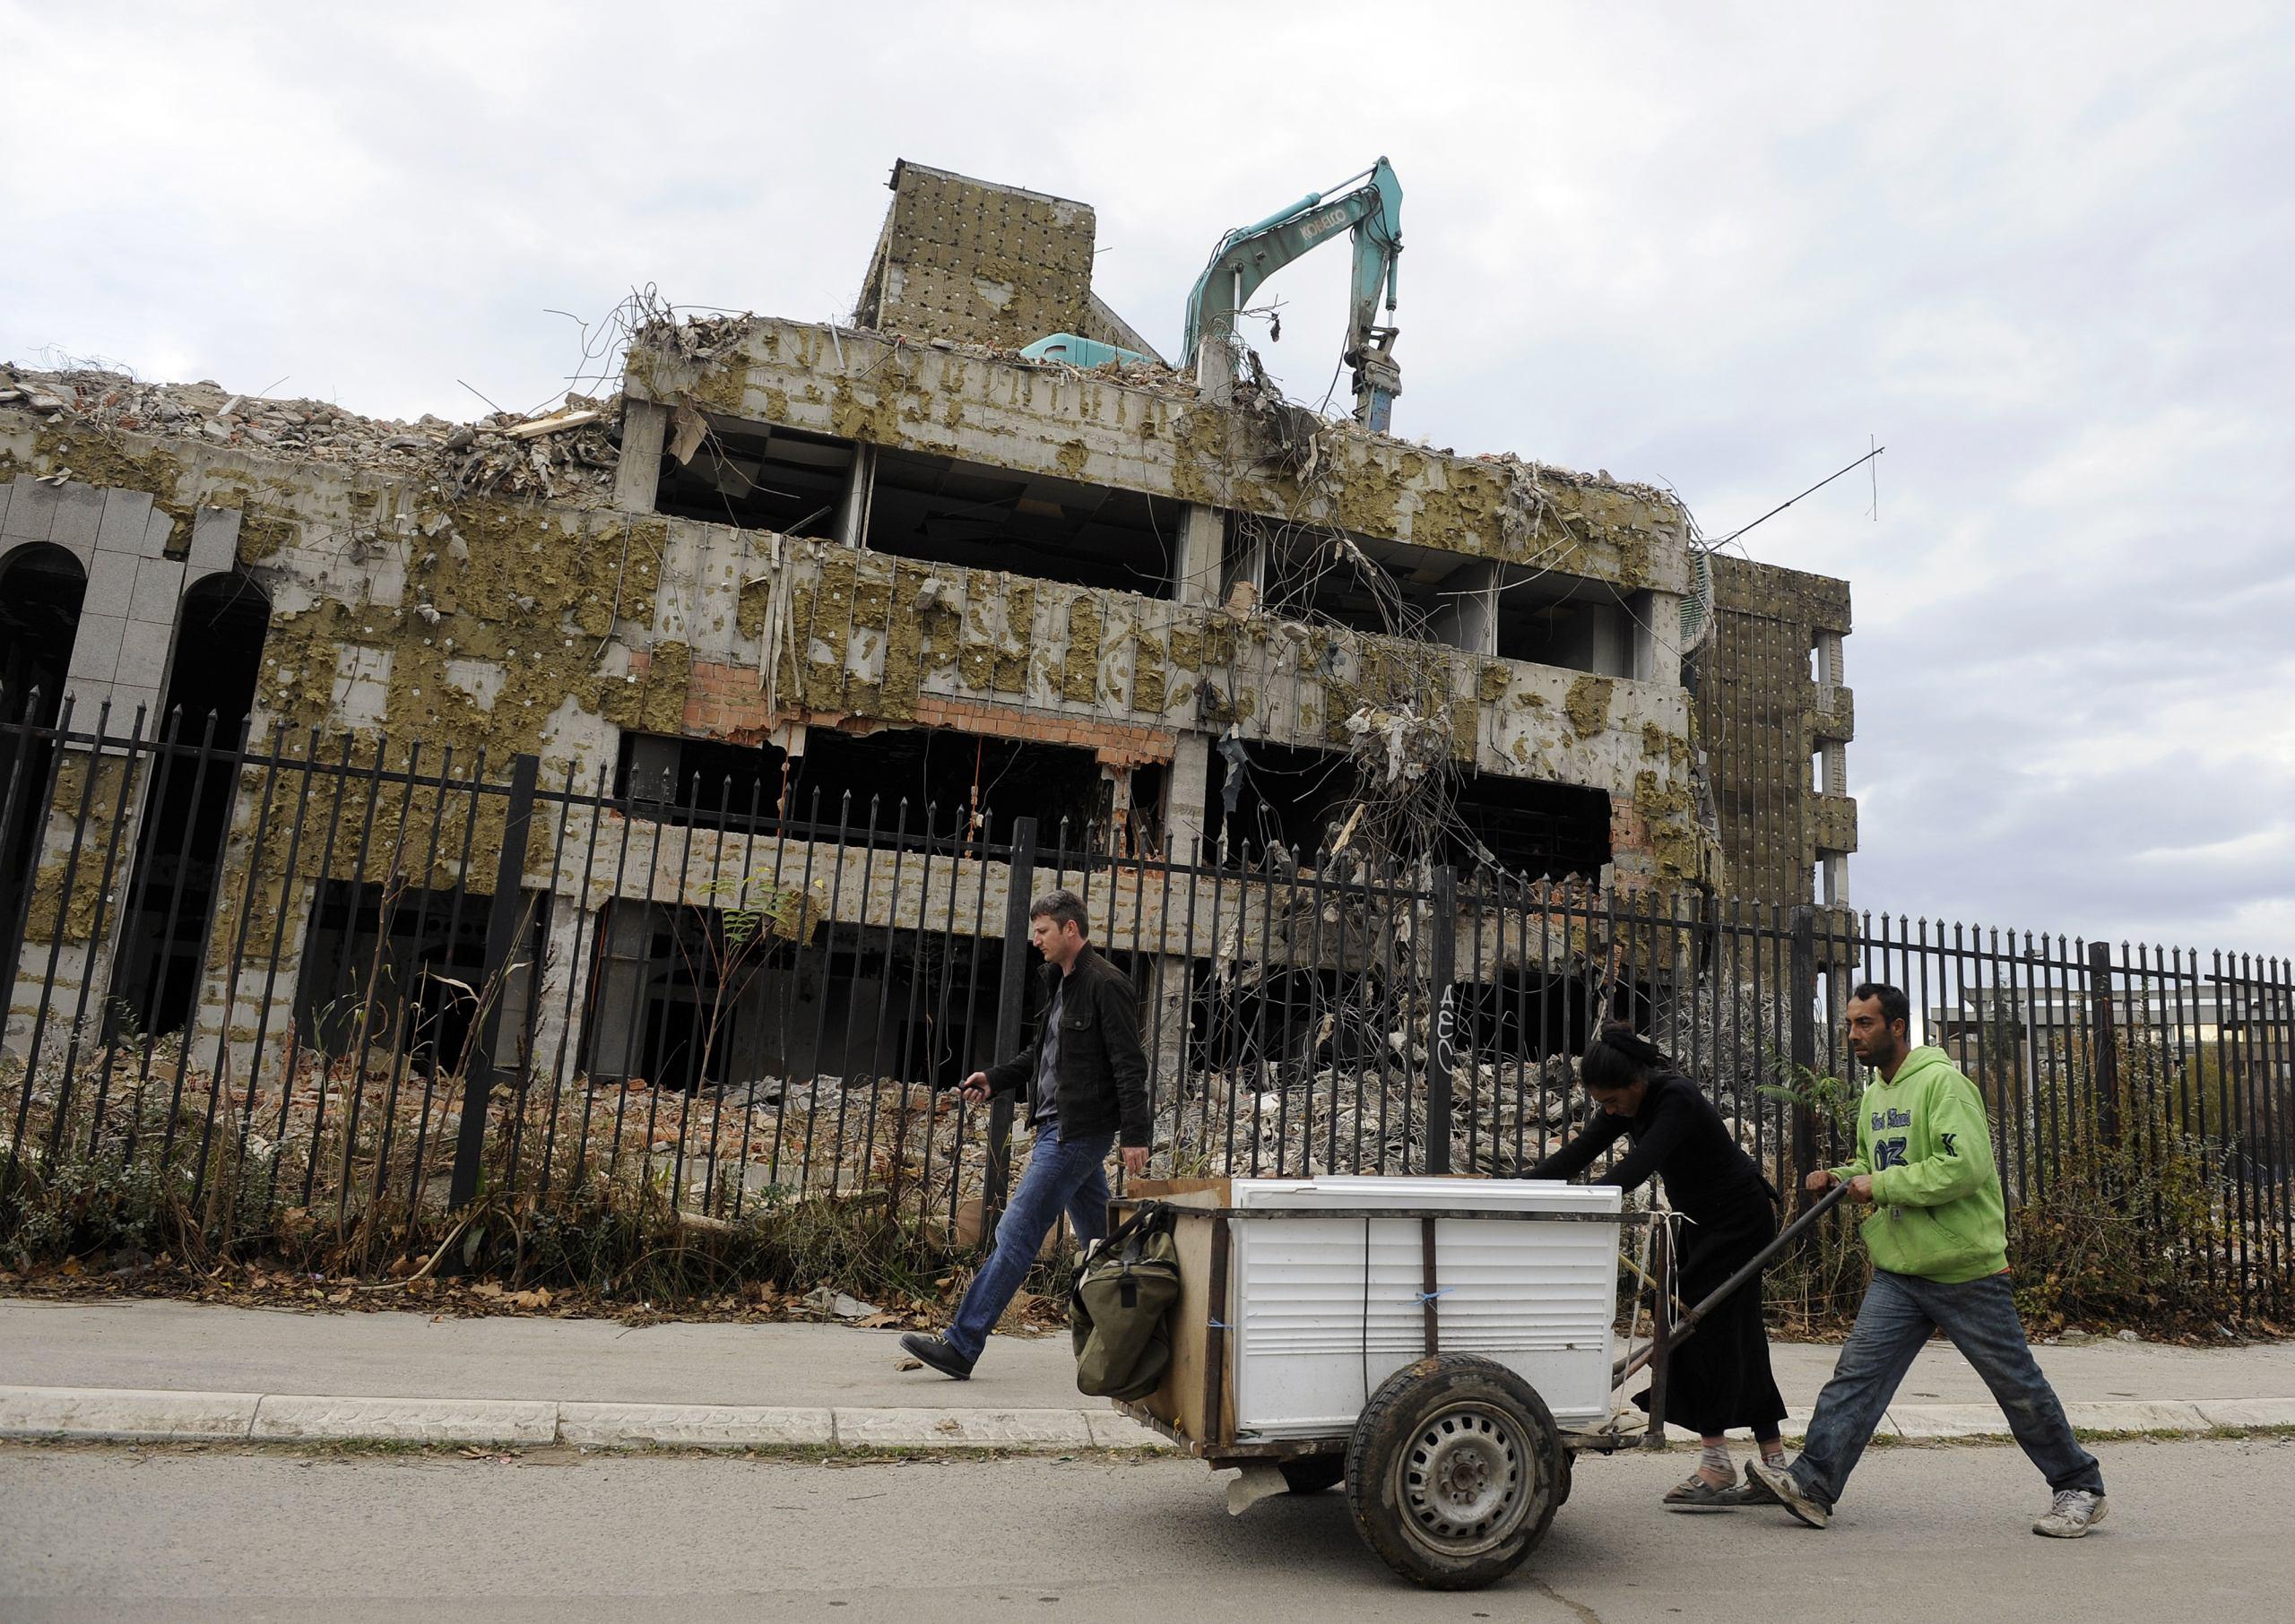 Pedestrians walk past the remains of the former Chinese Embassy in Belgrade,  on November 10, 2010. In 1999, the Chinese embassy in Belgrade,  was hit and set on fire during Nato air strikes on the city.   AFP PHOTO / Andrej ISAKOVIC (Photo by ANDREJ ISAKOVIC / AFP)